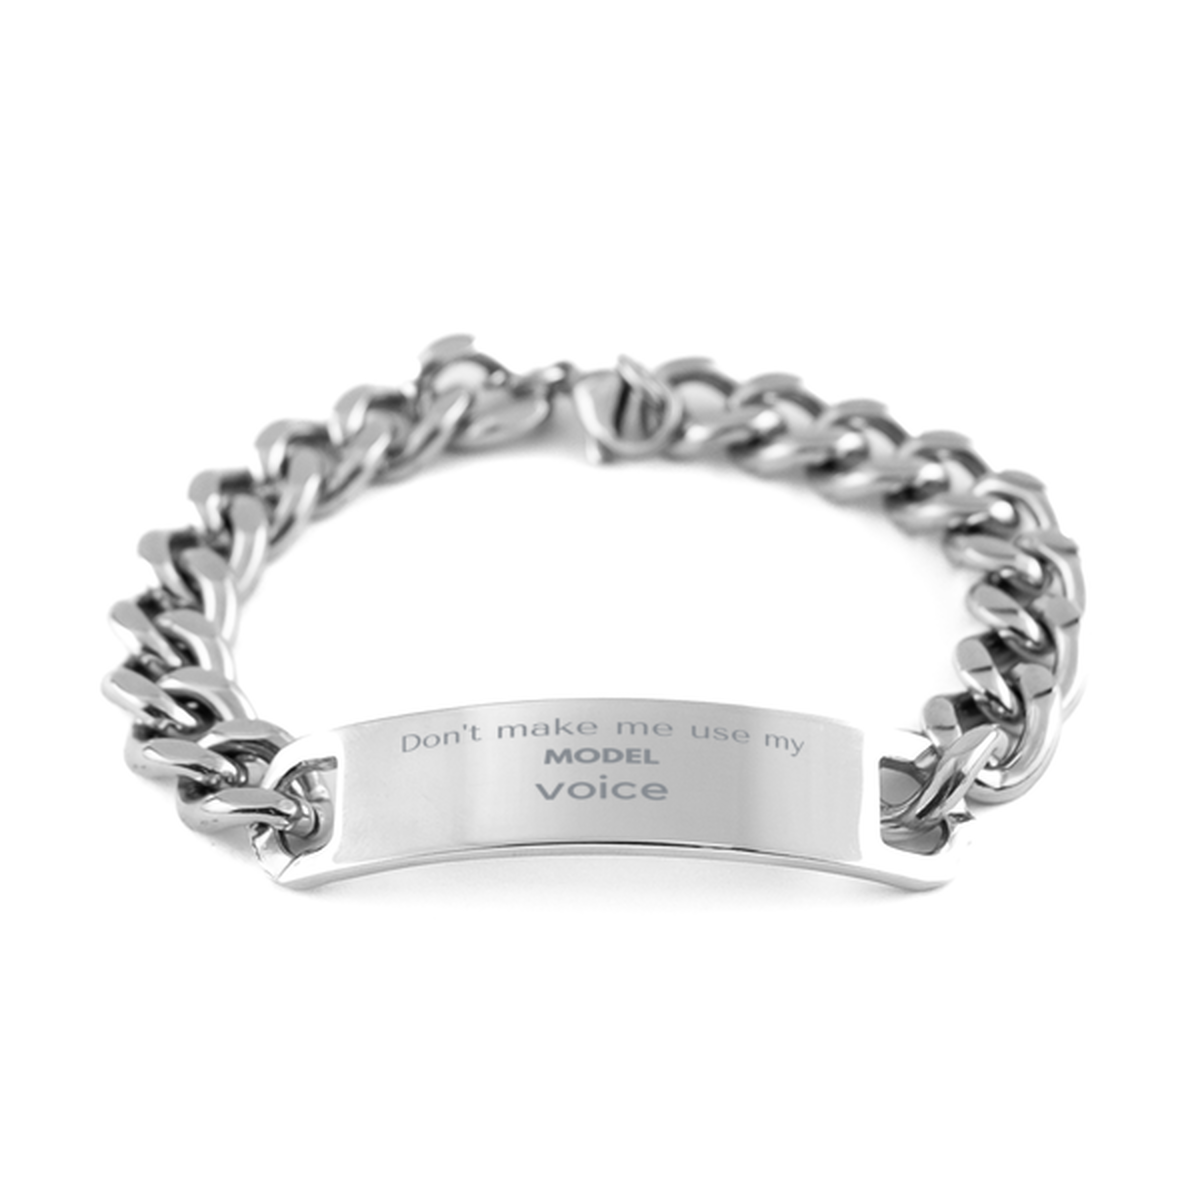 Don't make me use my Model voice, Sarcasm Model Gifts, Christmas Model Cuban Chain Stainless Steel Bracelet Birthday Unique Gifts For Model Coworkers, Men, Women, Colleague, Friends